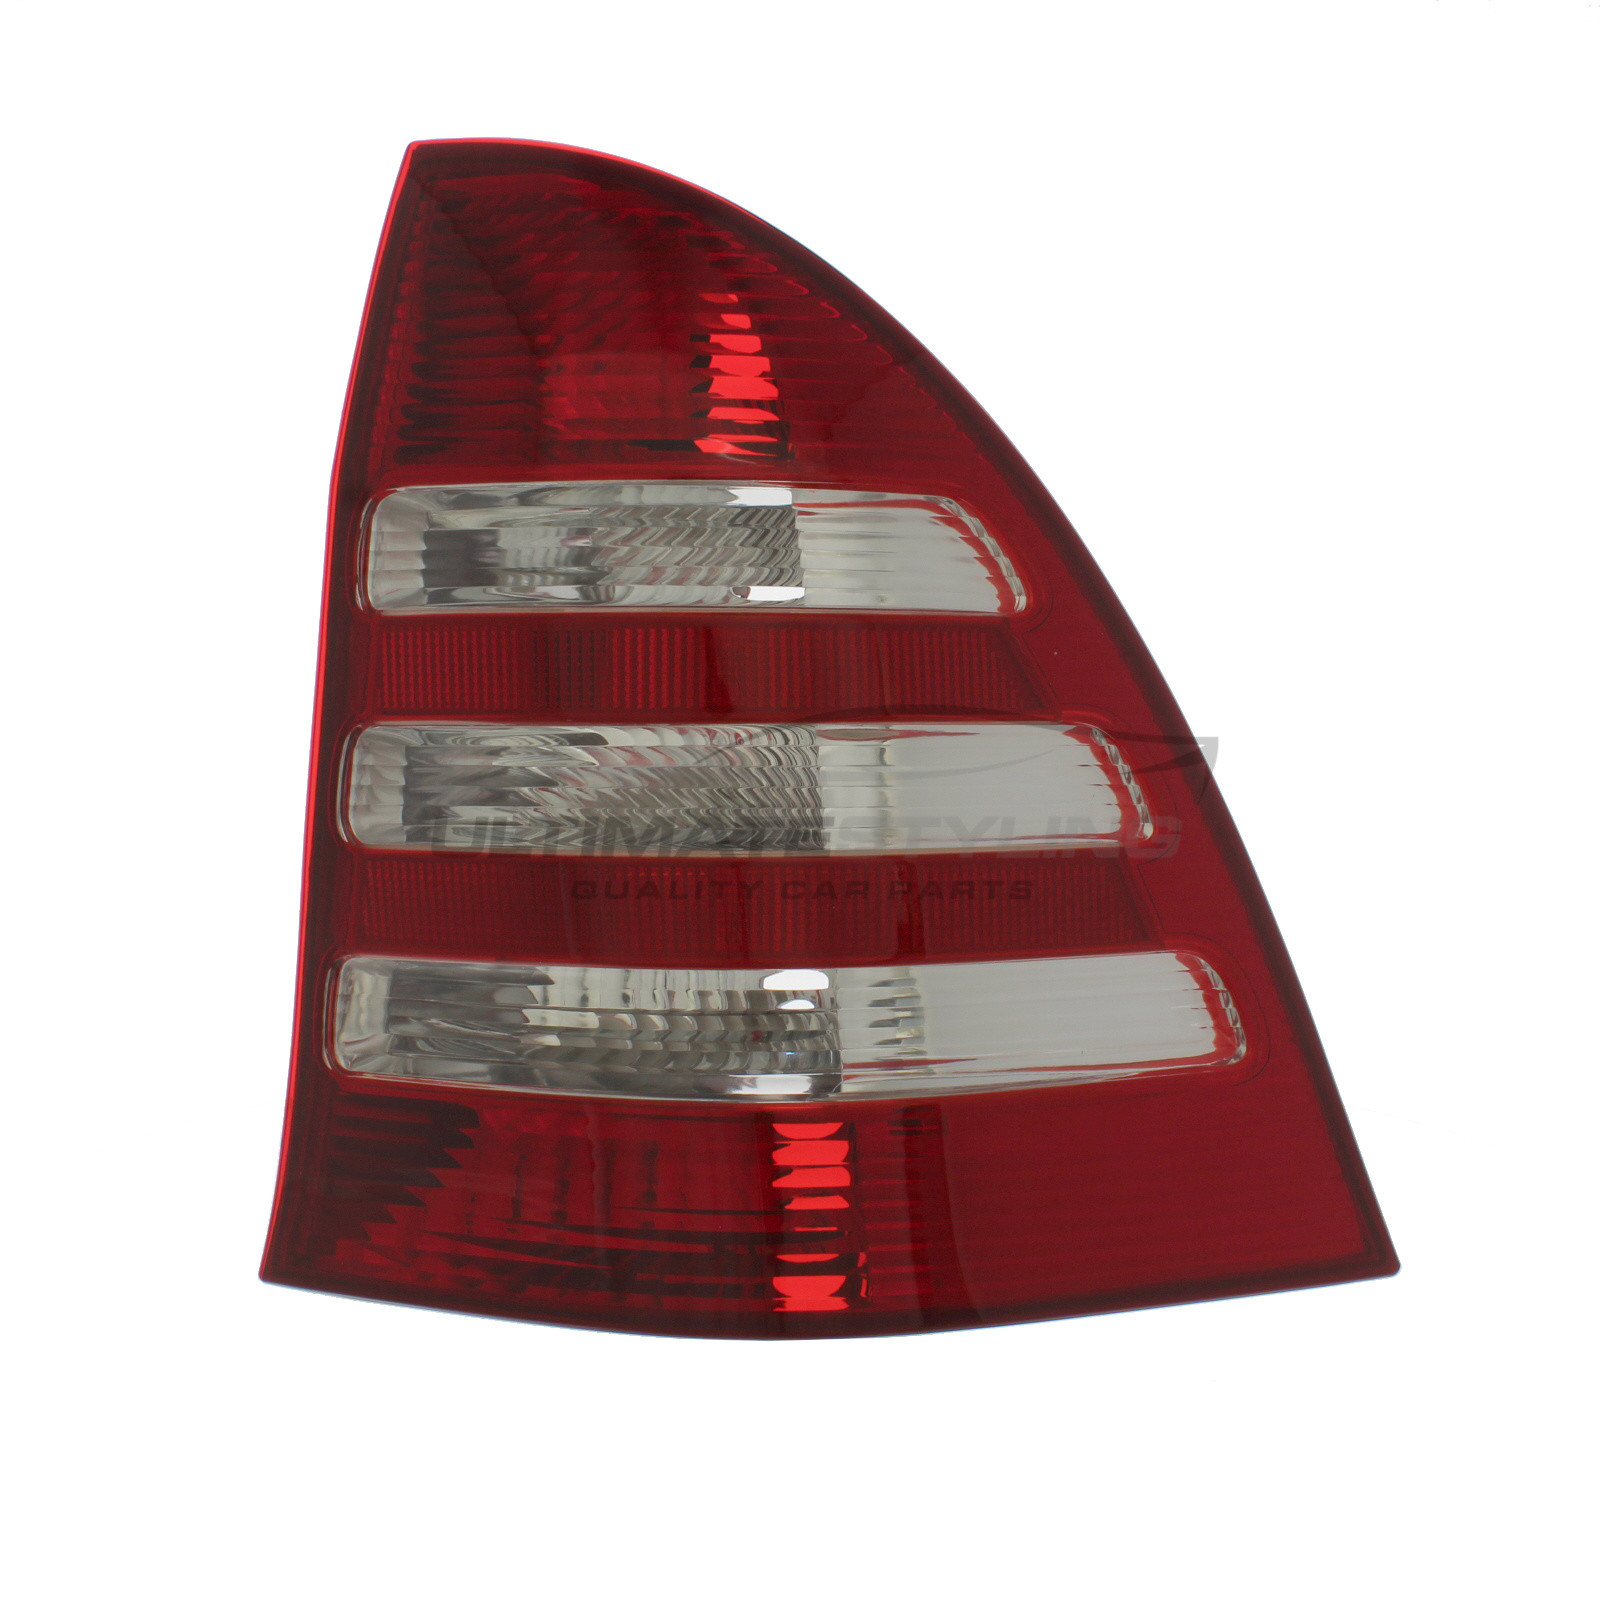 Mercedes Benz C Class 2004-2008 Non-LED Rear Light / Tail Light Excluding Bulb Holder Drivers Side (RH)